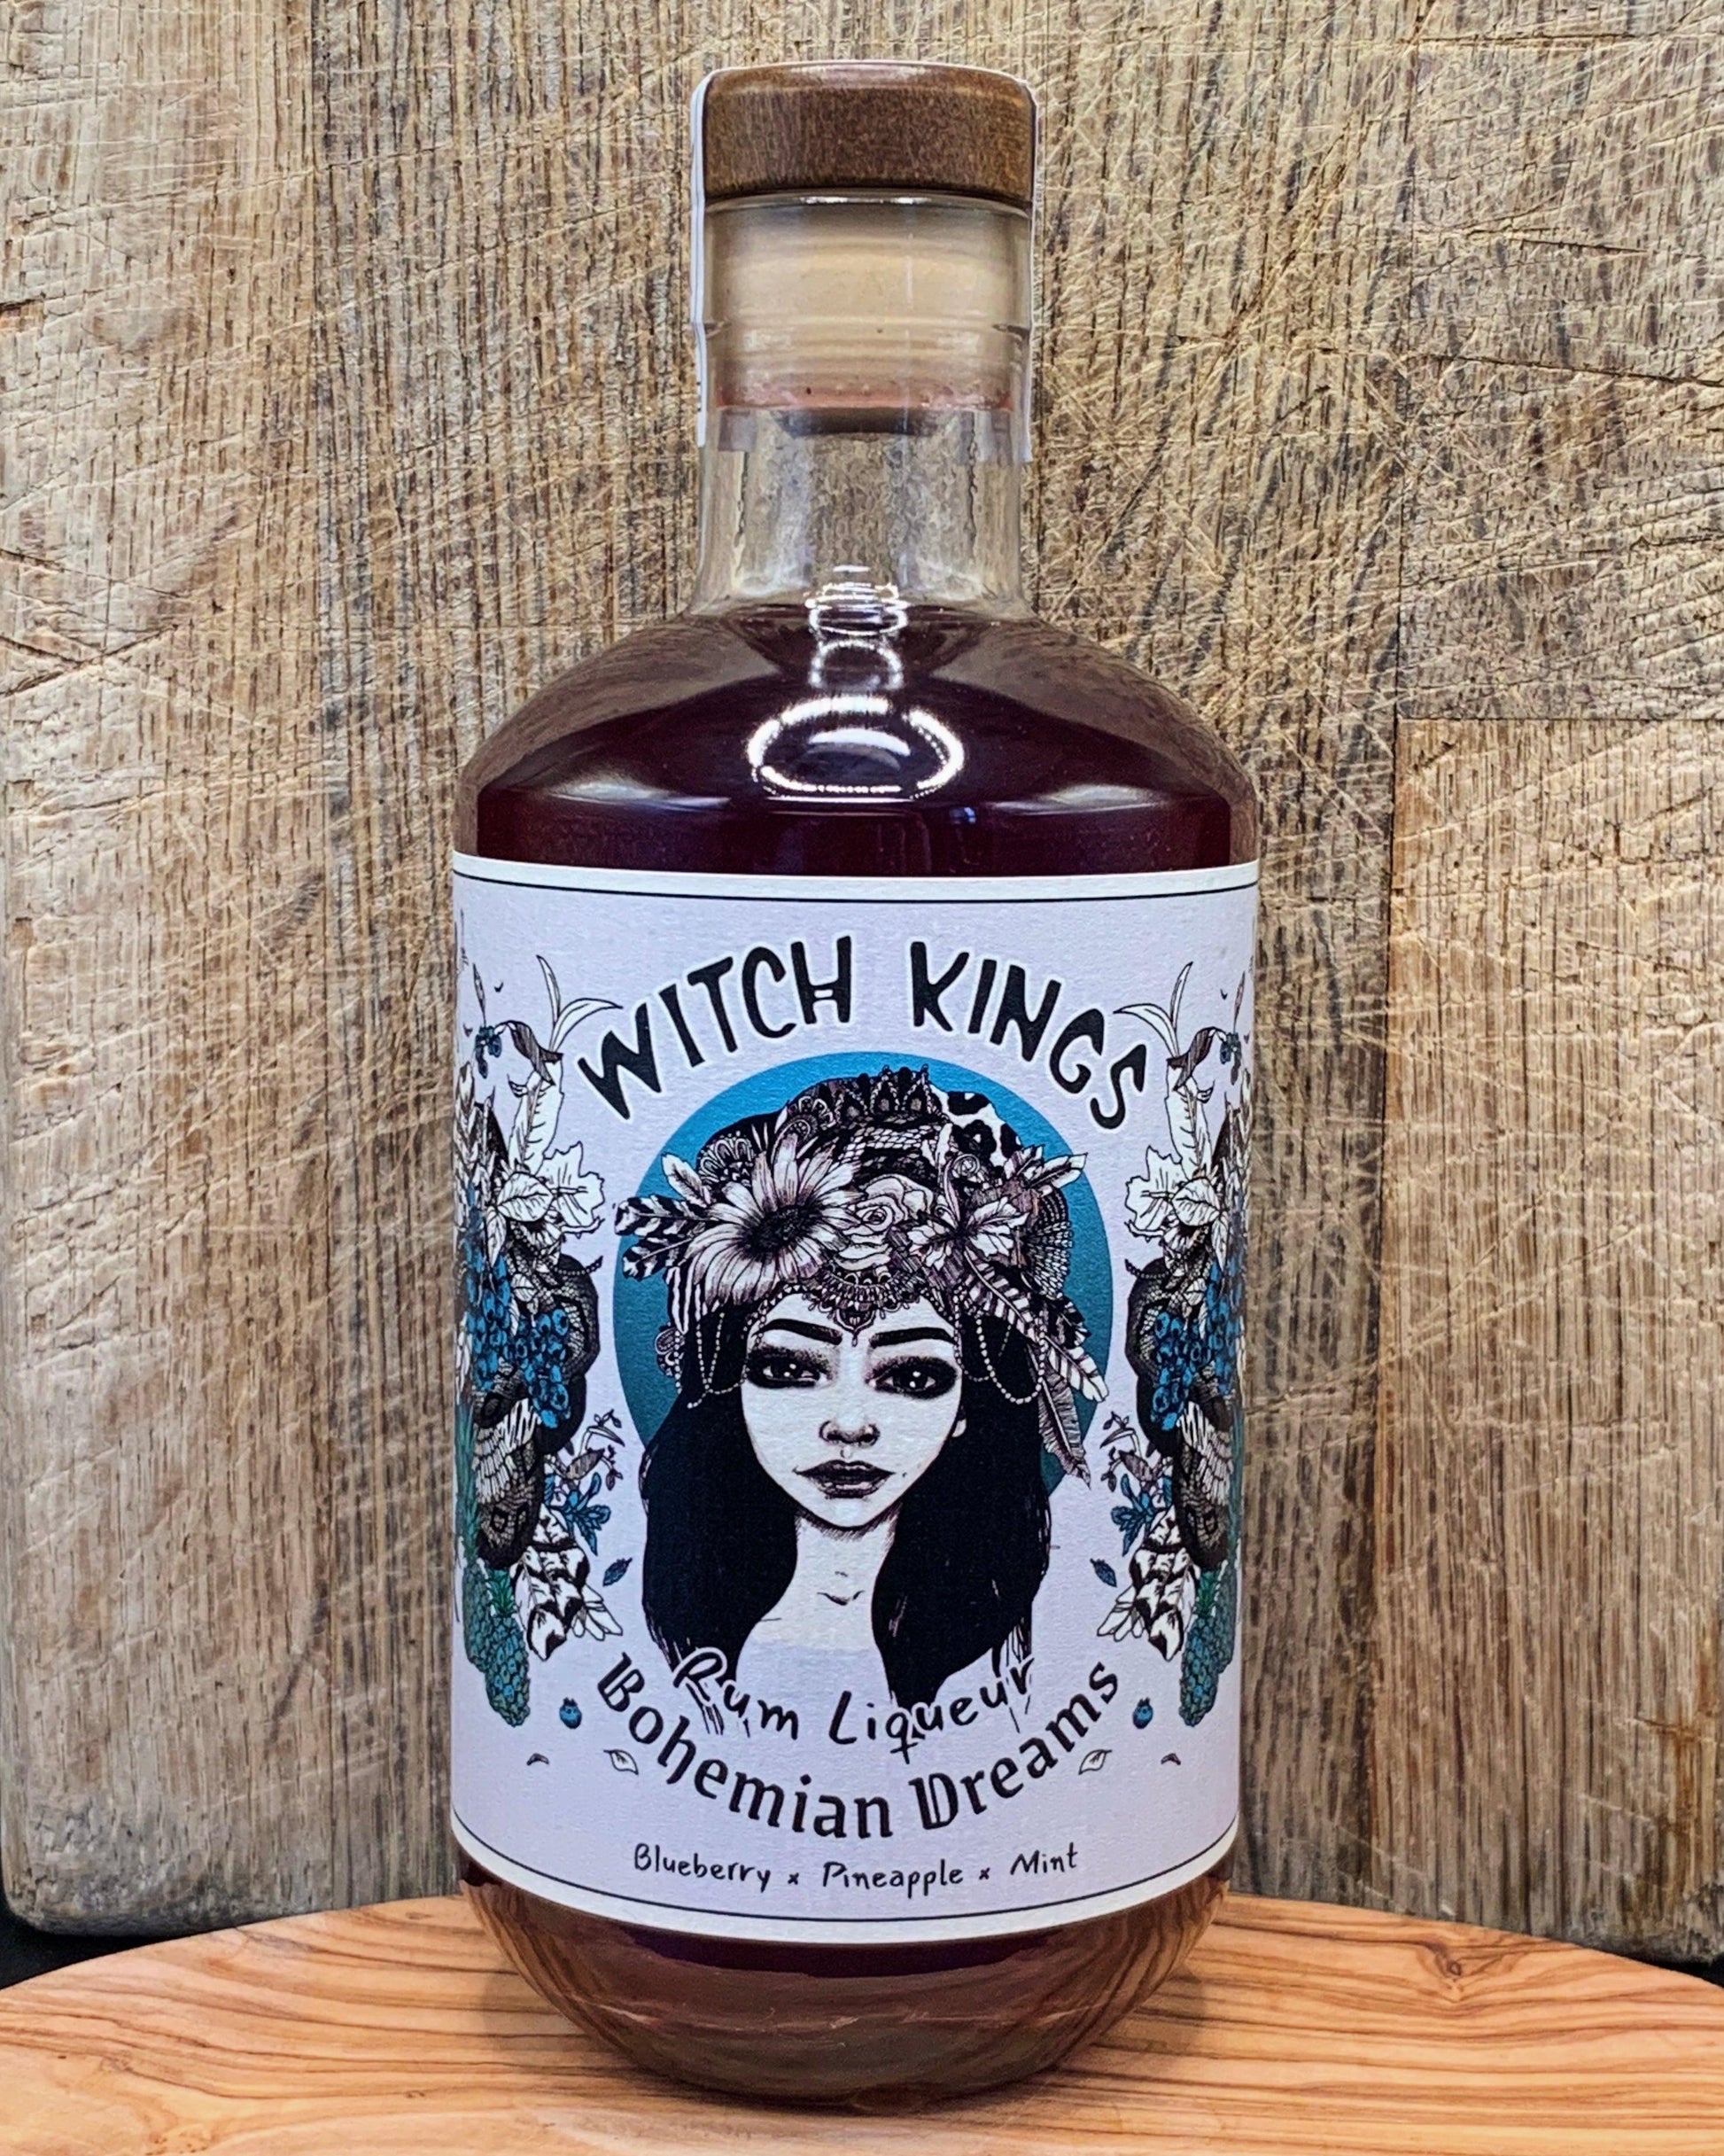 Bohemian Dreams - Blueberry, Pineapple & Mint - Witch Kings Rum - Vegan & Gluten-Free - Made in Manchester